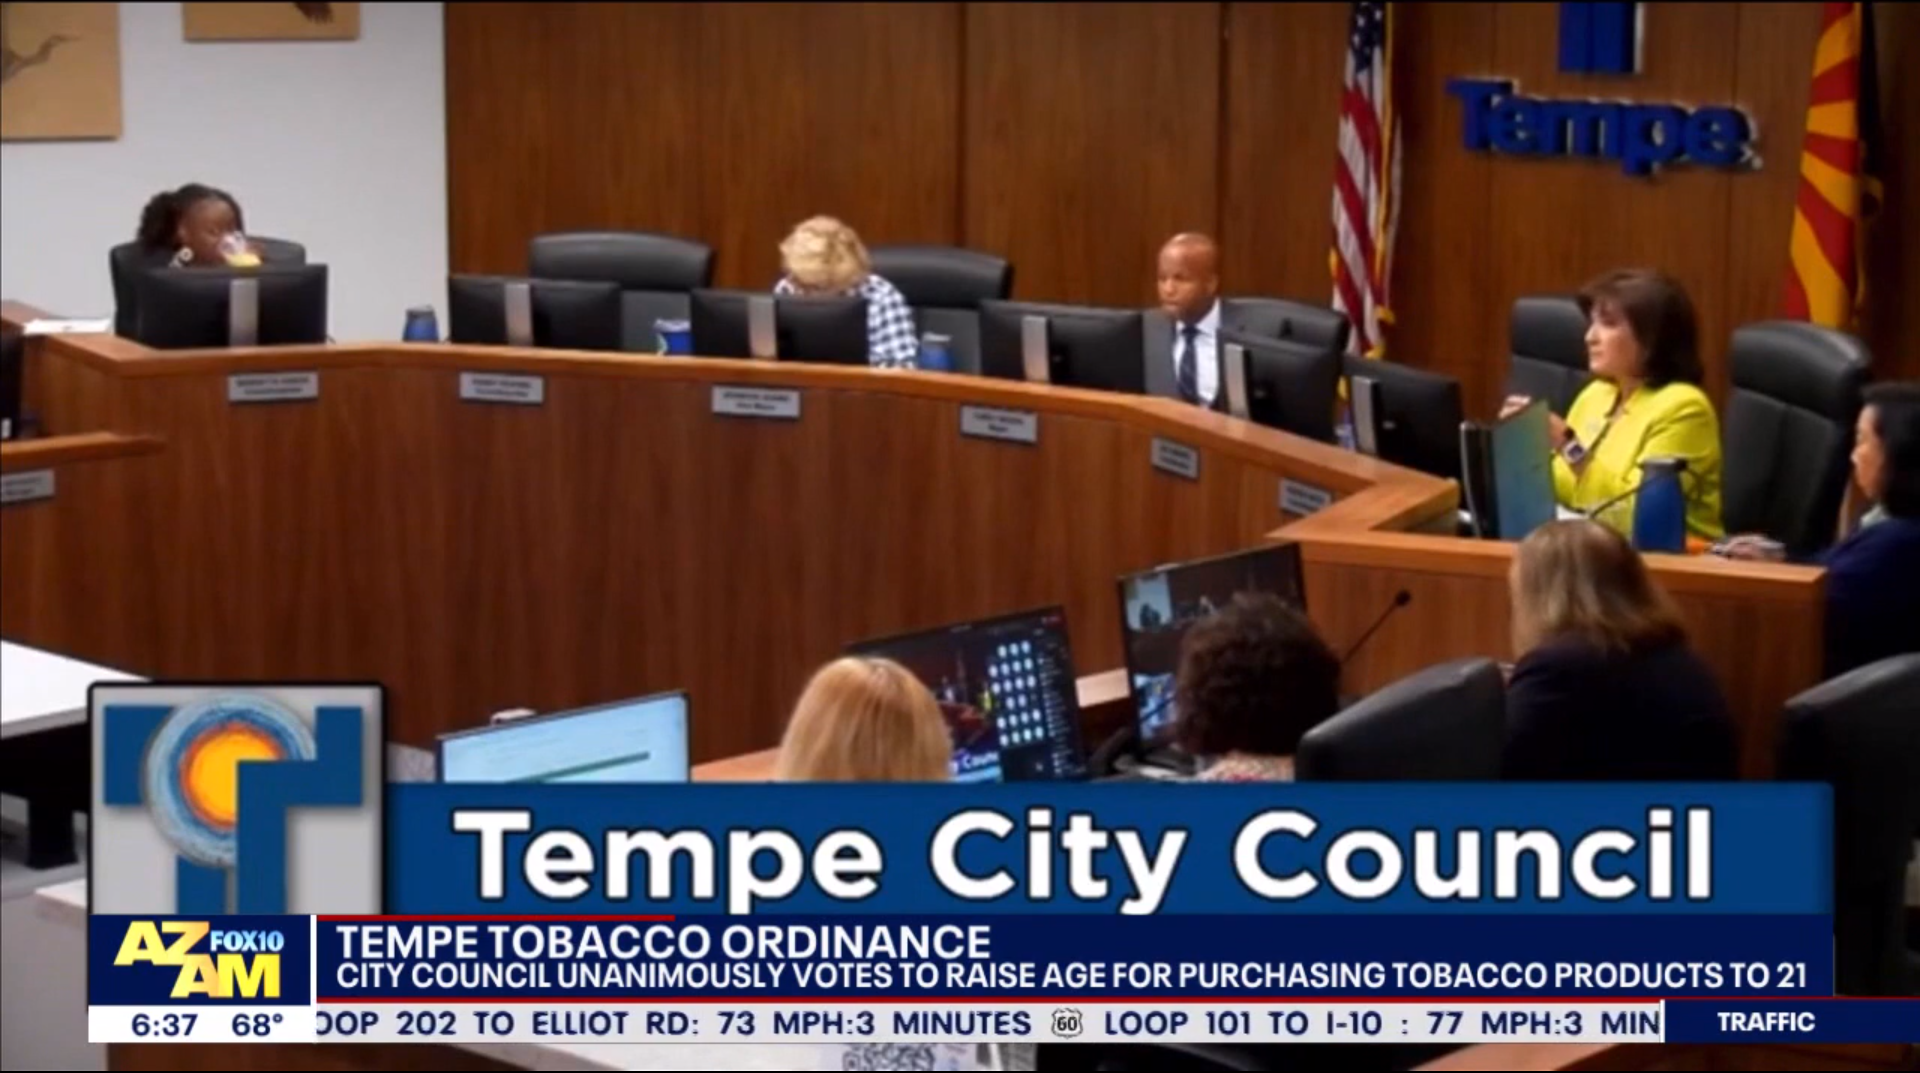 Councilmember Garlid votes to raise the legal age to purchase tobacco products to 21